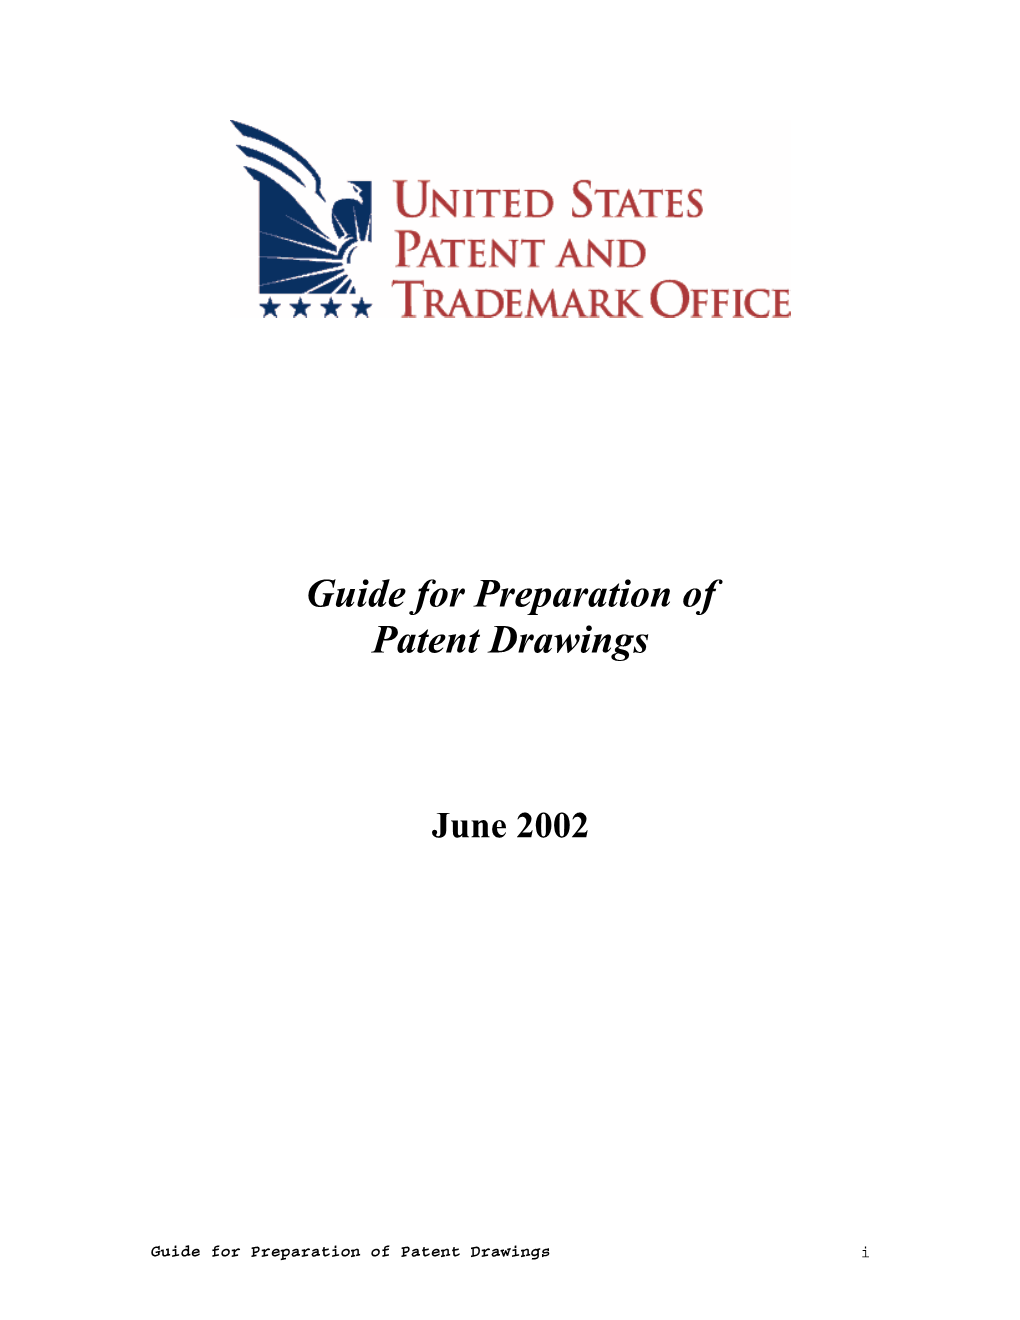 PTO Guide for Preparation of Patent Drawings